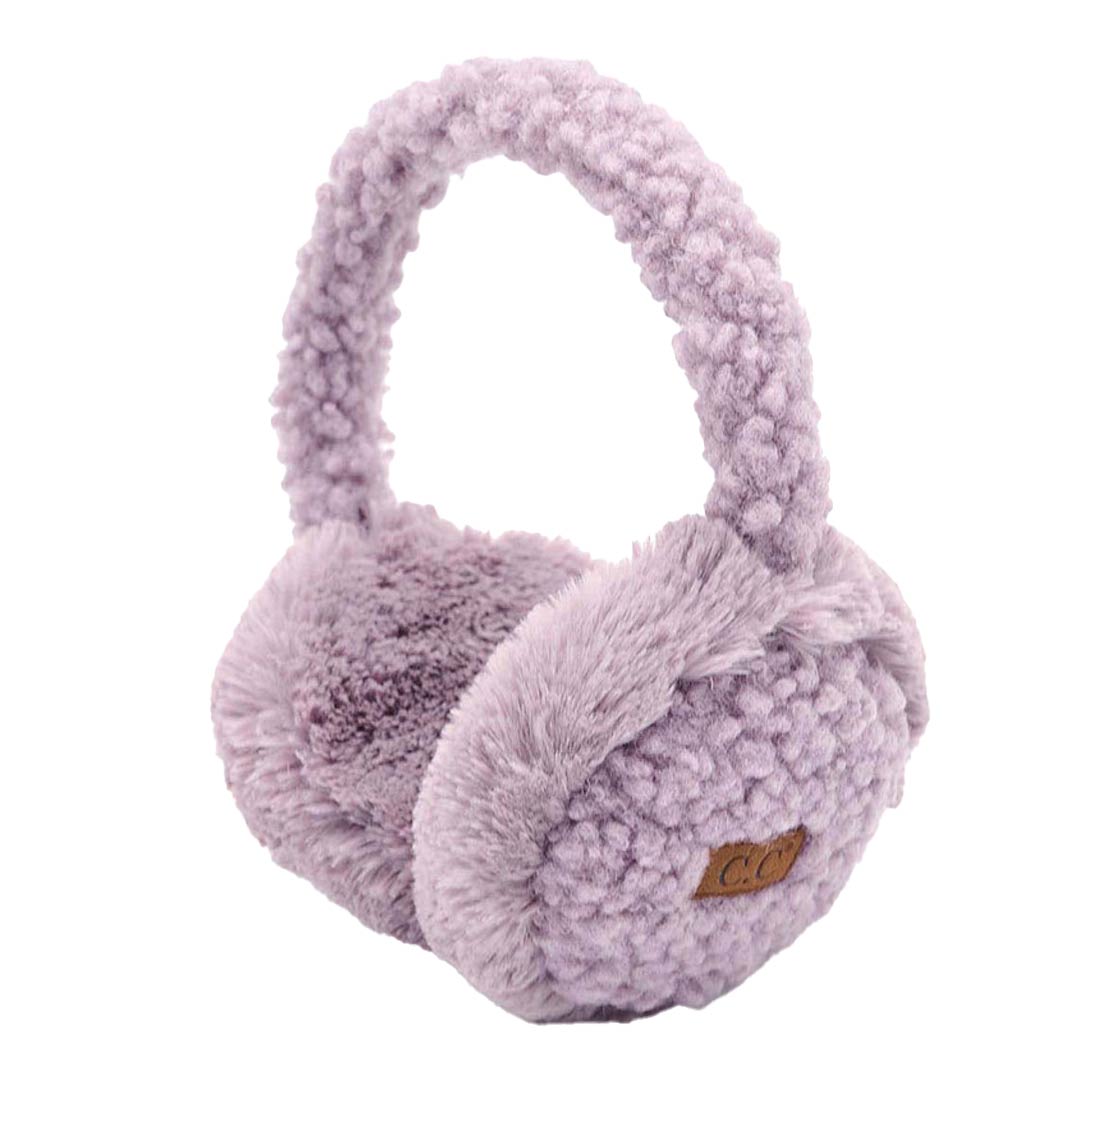 Violet C.C Faux Fur Sherpa Earmuffs. Stay warm and stylish with these. Crafted with quality faux fur and Sherpa on the inside for ultimate comfort, these earmuffs provide superior insulation and protection from the cold. Their classic and timeless design allows them to easily match with any outfit.